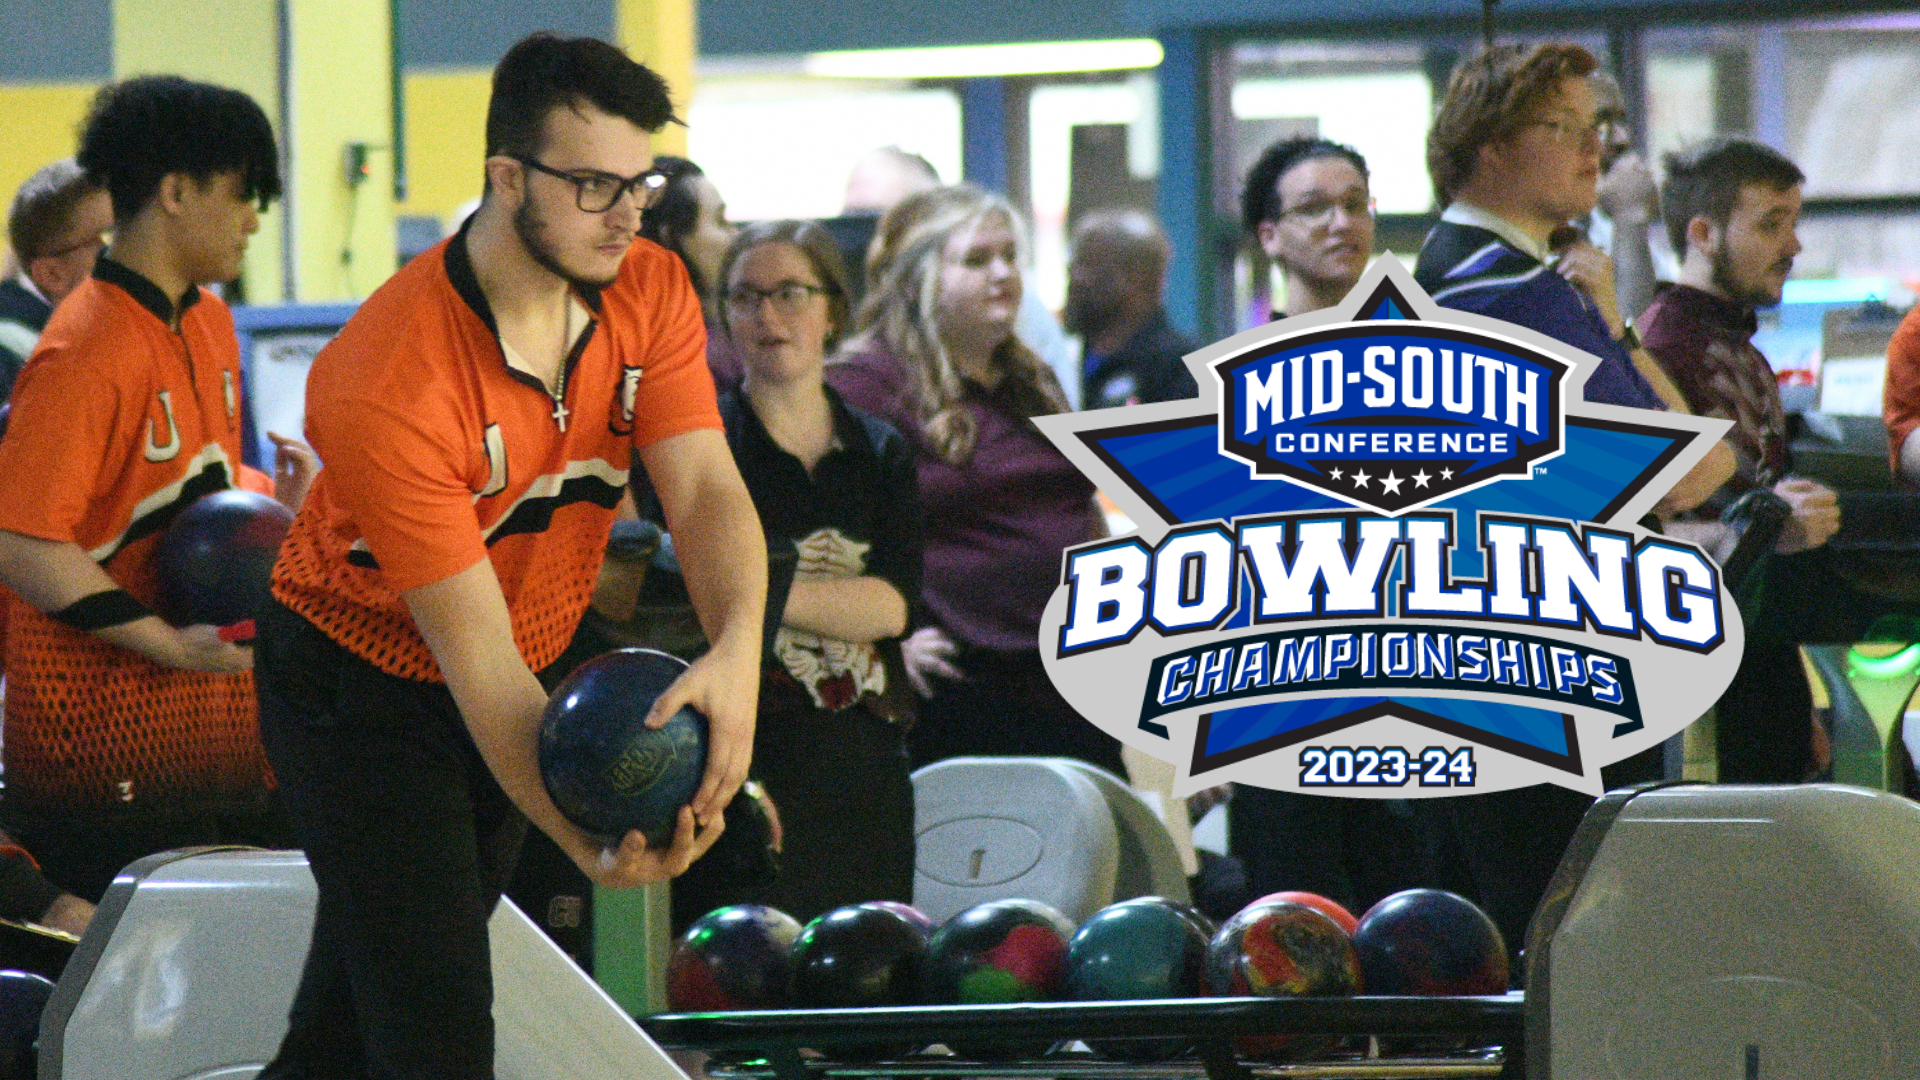 Union men&rsquo;s bowling recap from MSC Championships